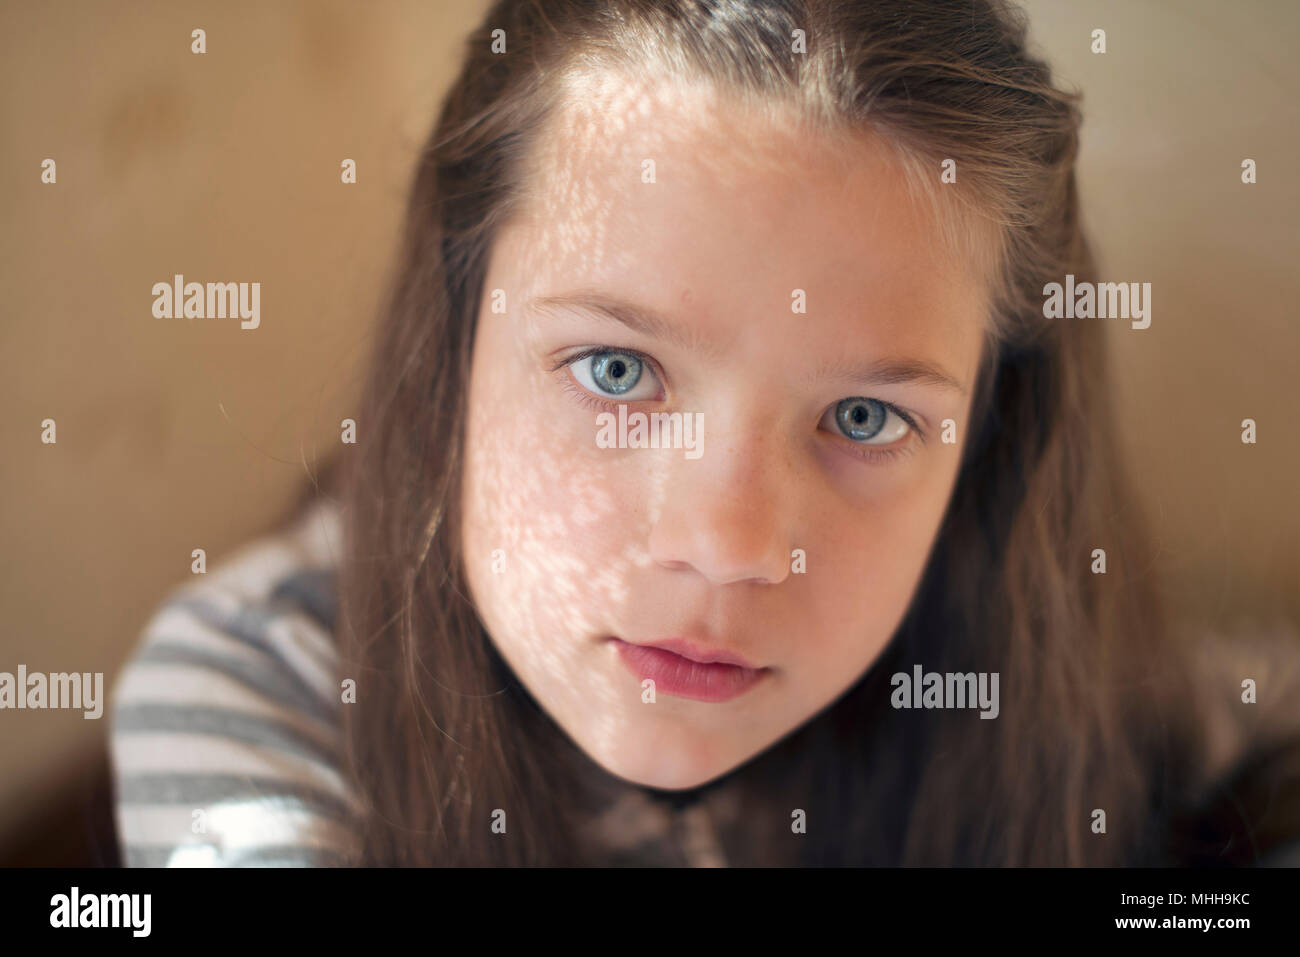 straight looking girl portrait with window curtain shadow on face Stock Photo